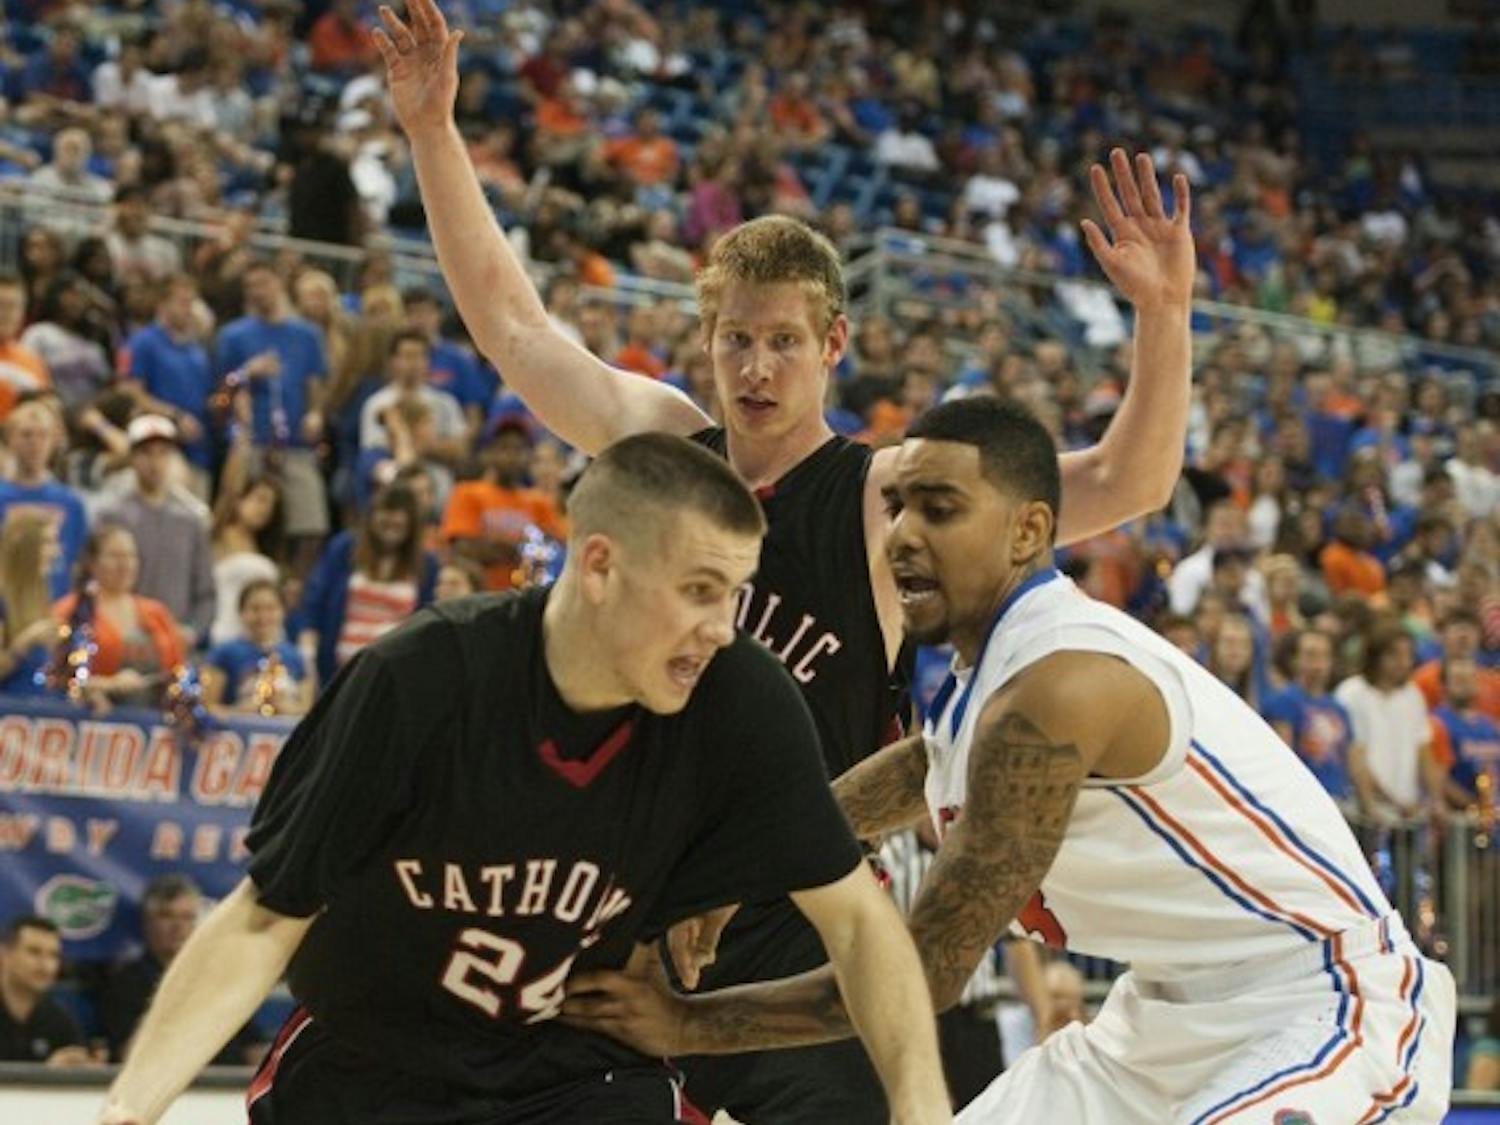 Billy Donovan Jr. (24) is transferring to UF from Catholic University. He played in an exhibition in the Stephen C. O'Connell Center on Nov. 3.